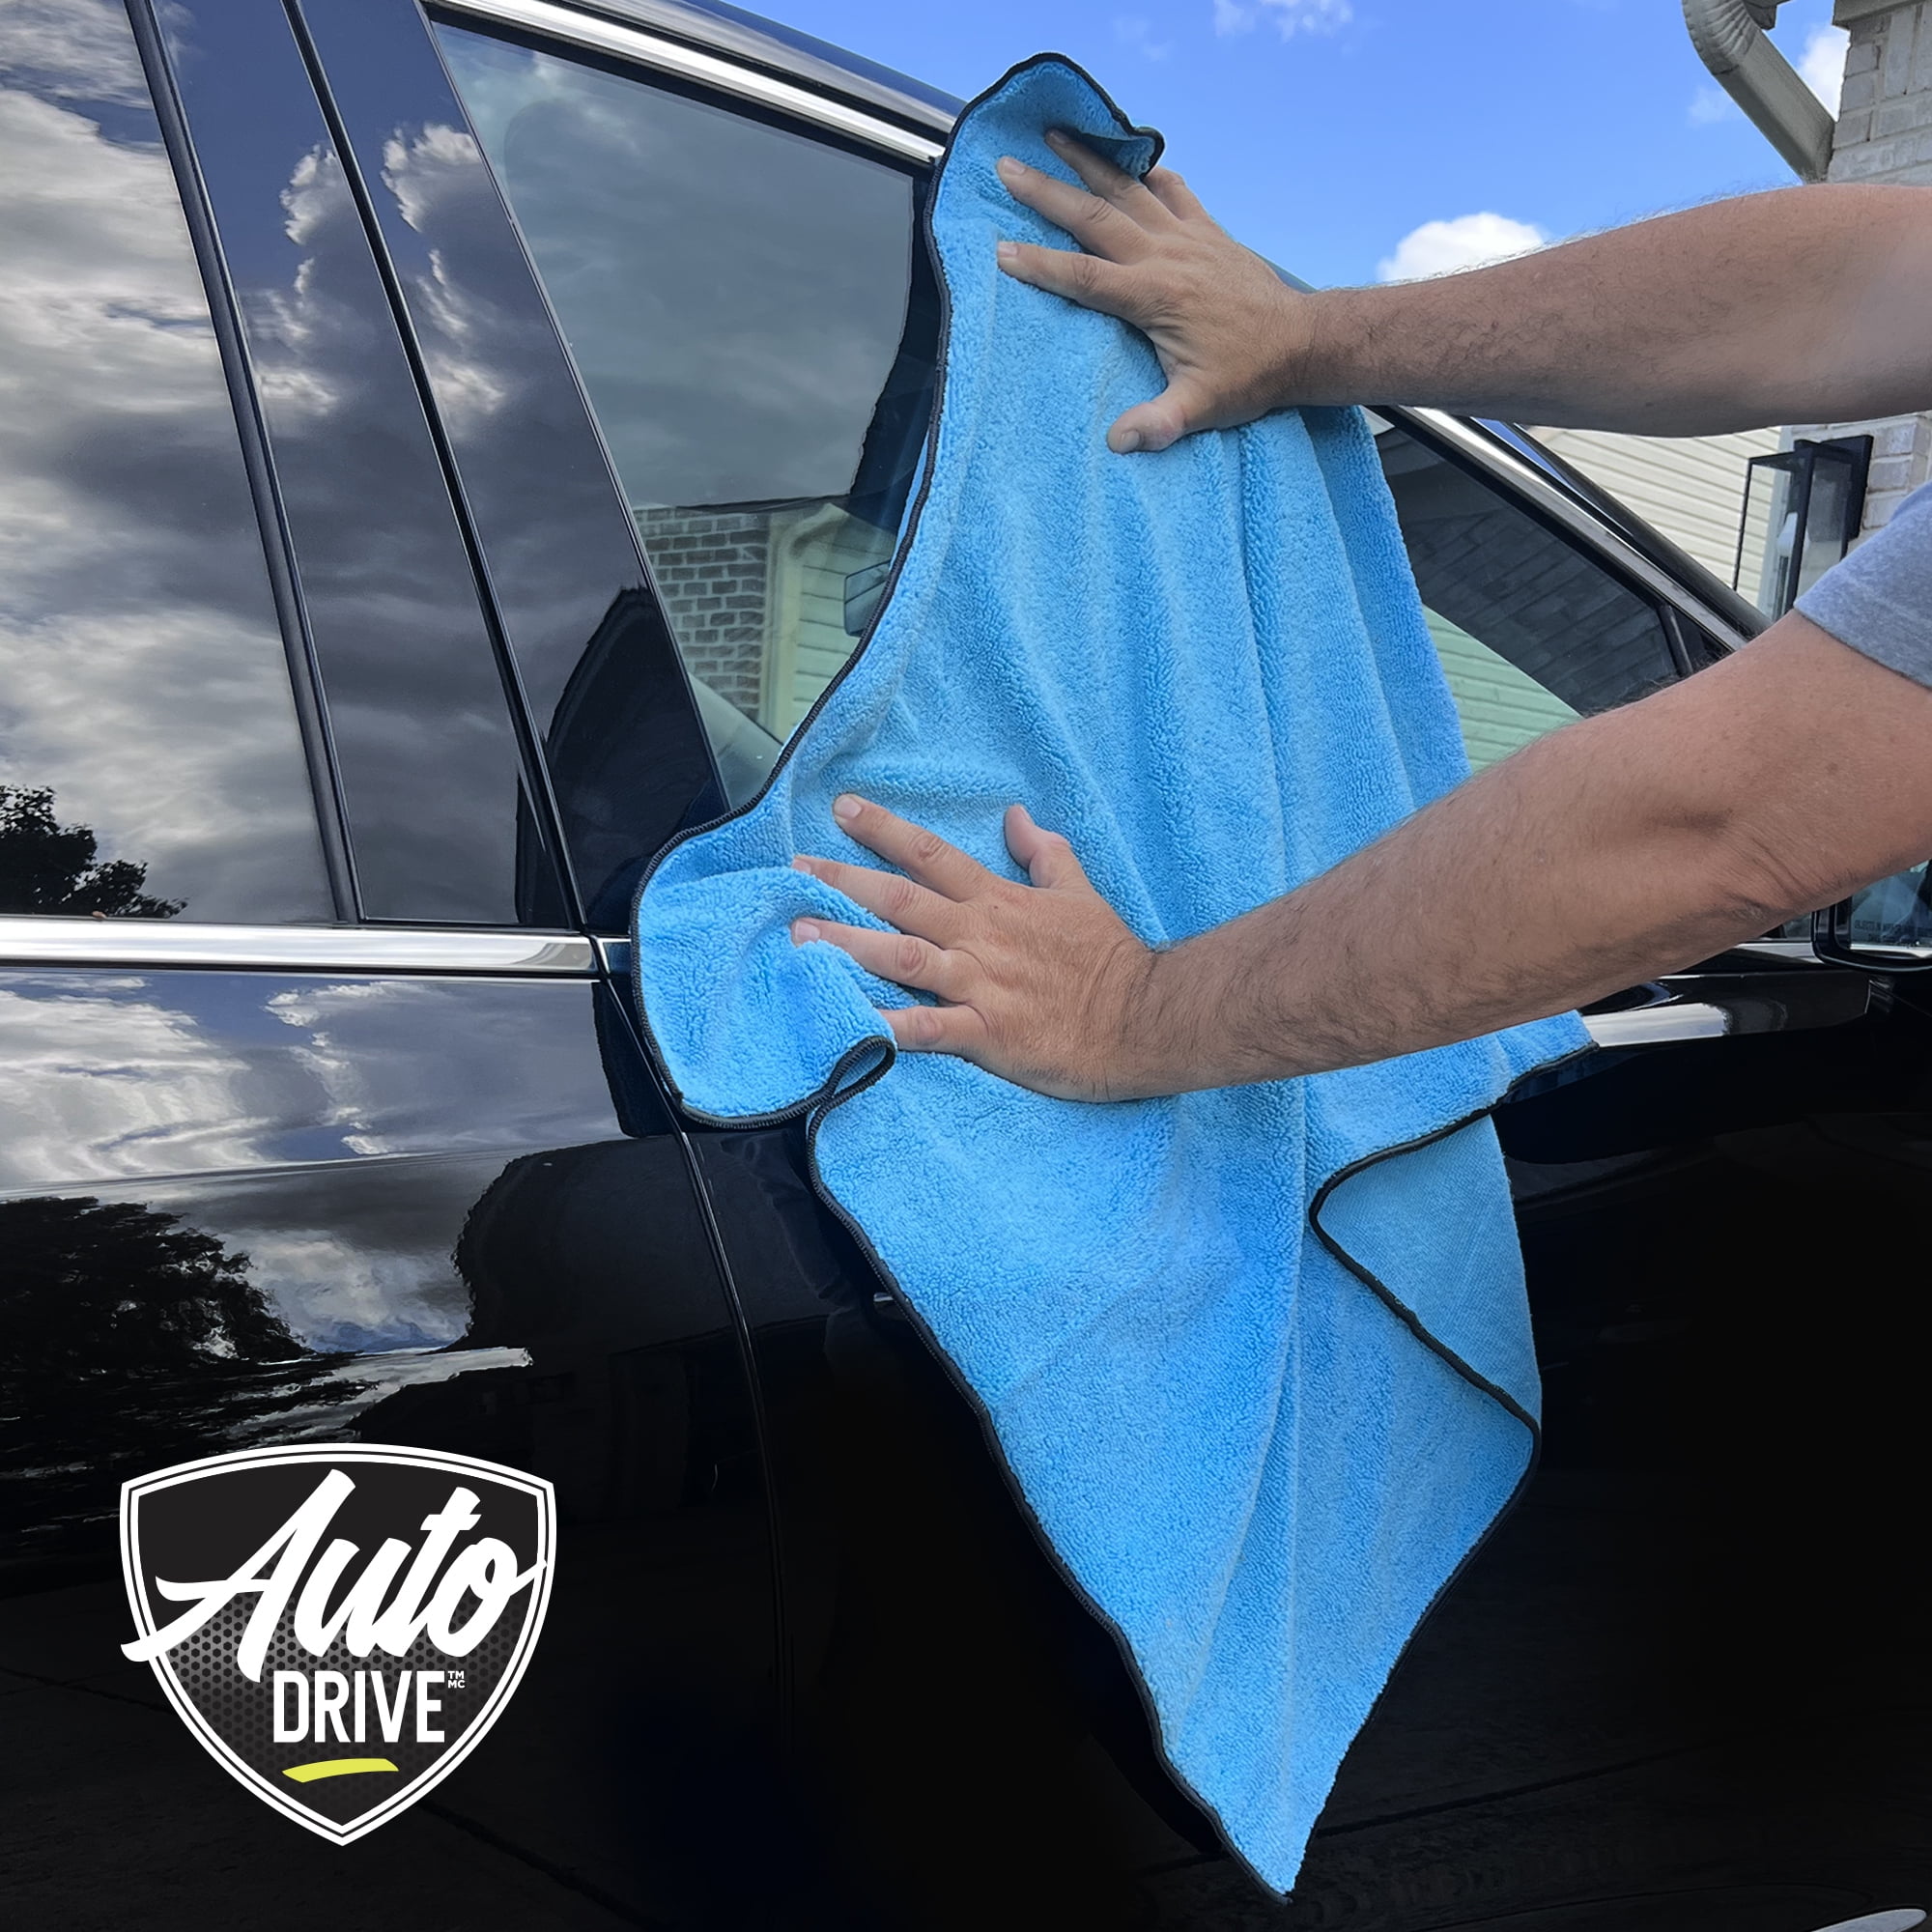 PROJE' Blue Microfiber Towel for Cars - Ultra Absorbent - Car Drying,  Polishing, Buffing Cloth & Interior Detailing Towel - 500 GSM 16x16in -  Auto